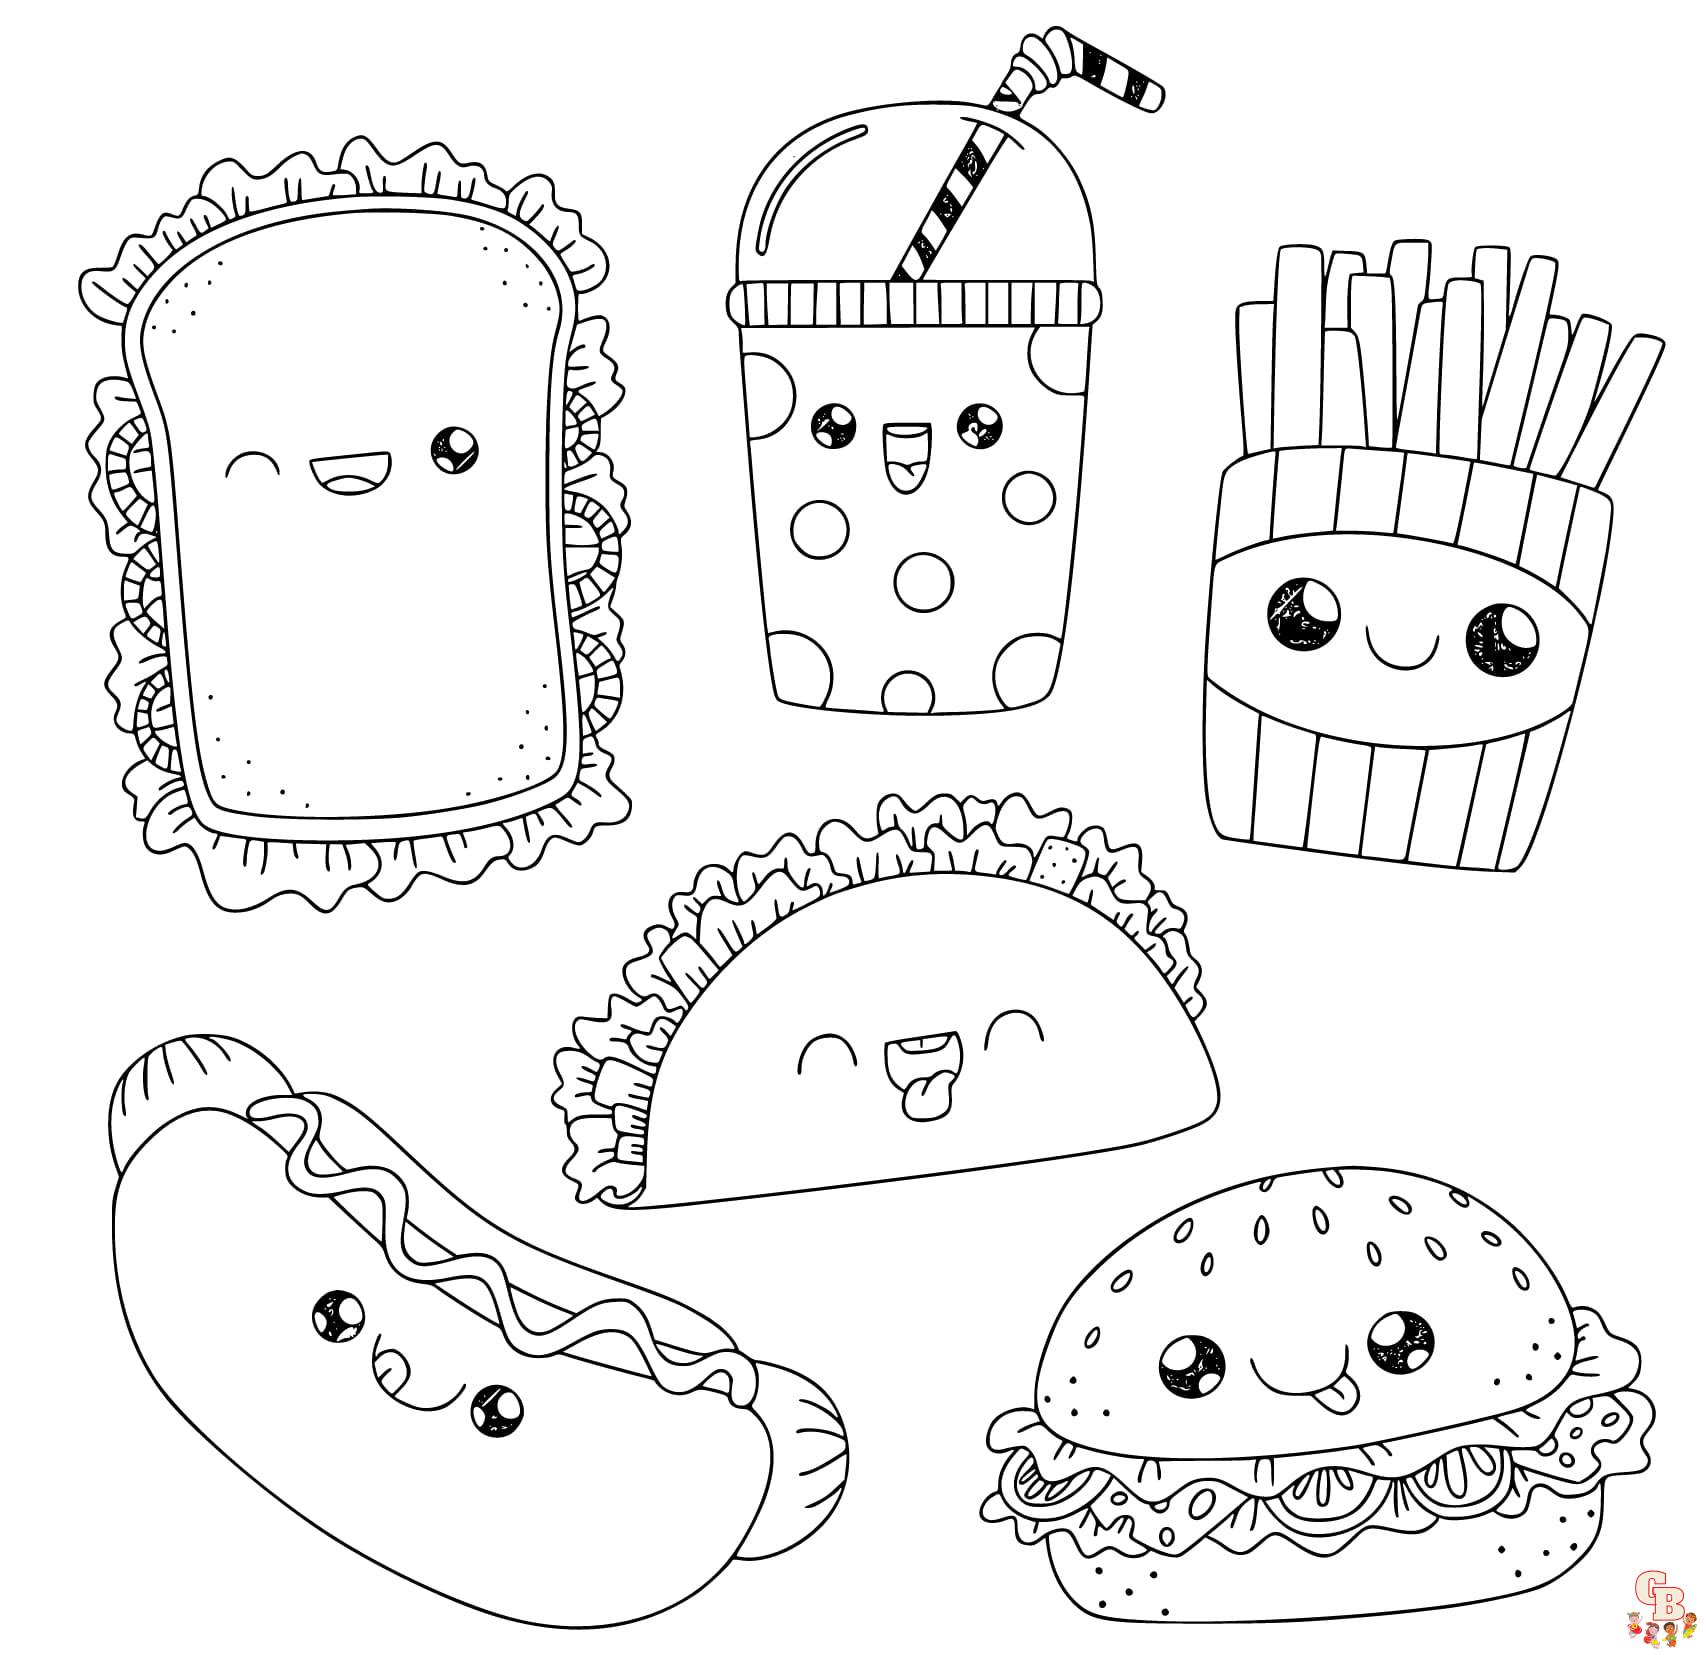 Printable Snack coloring sheets